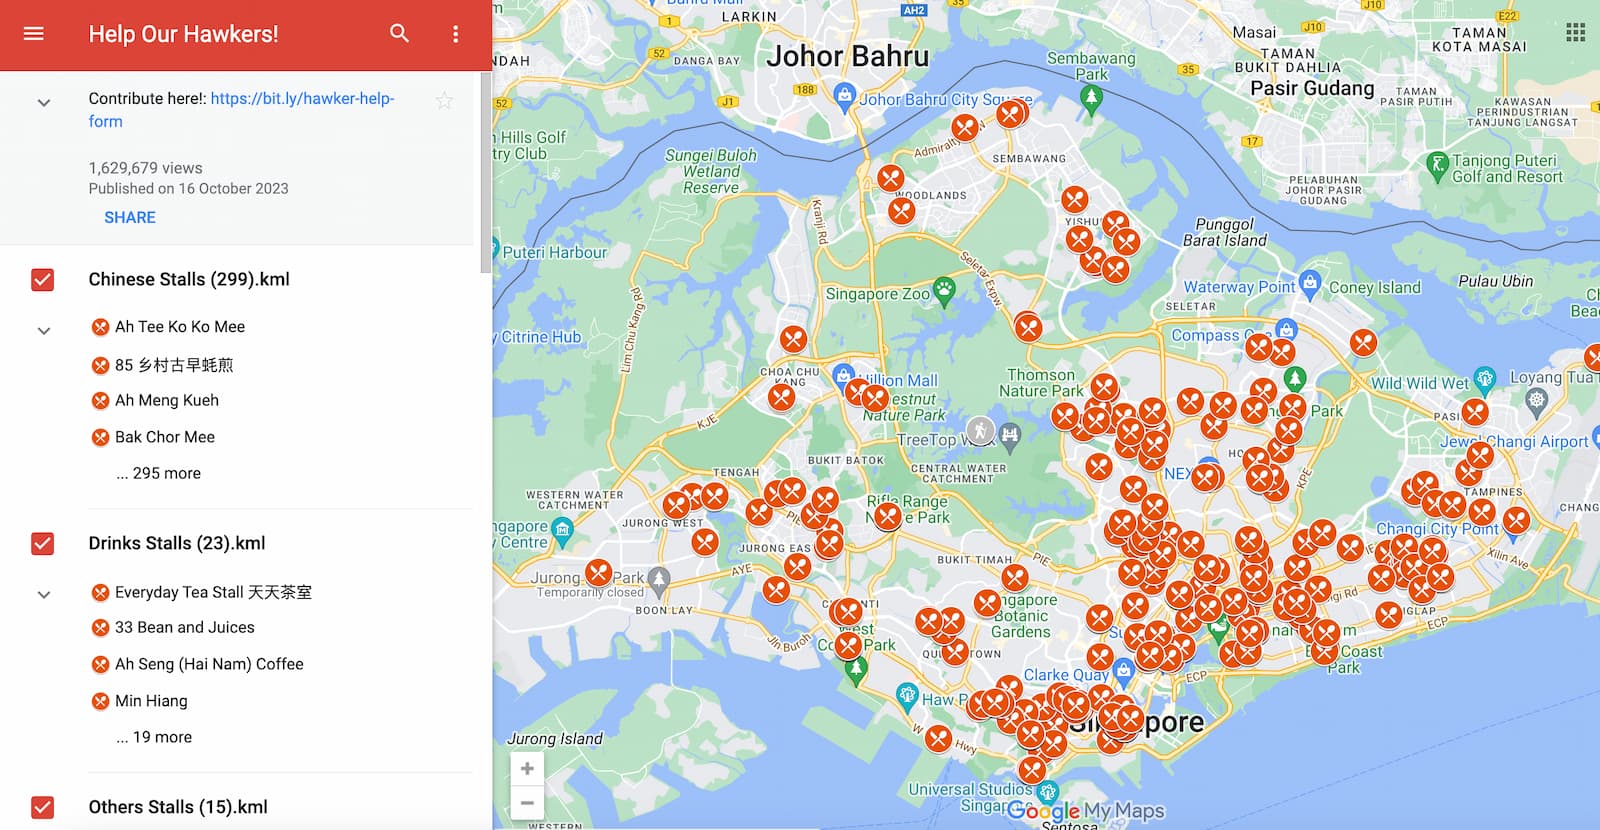 Screenshot of the Crowdsourcing map for disadvantaged hawkers created to help them